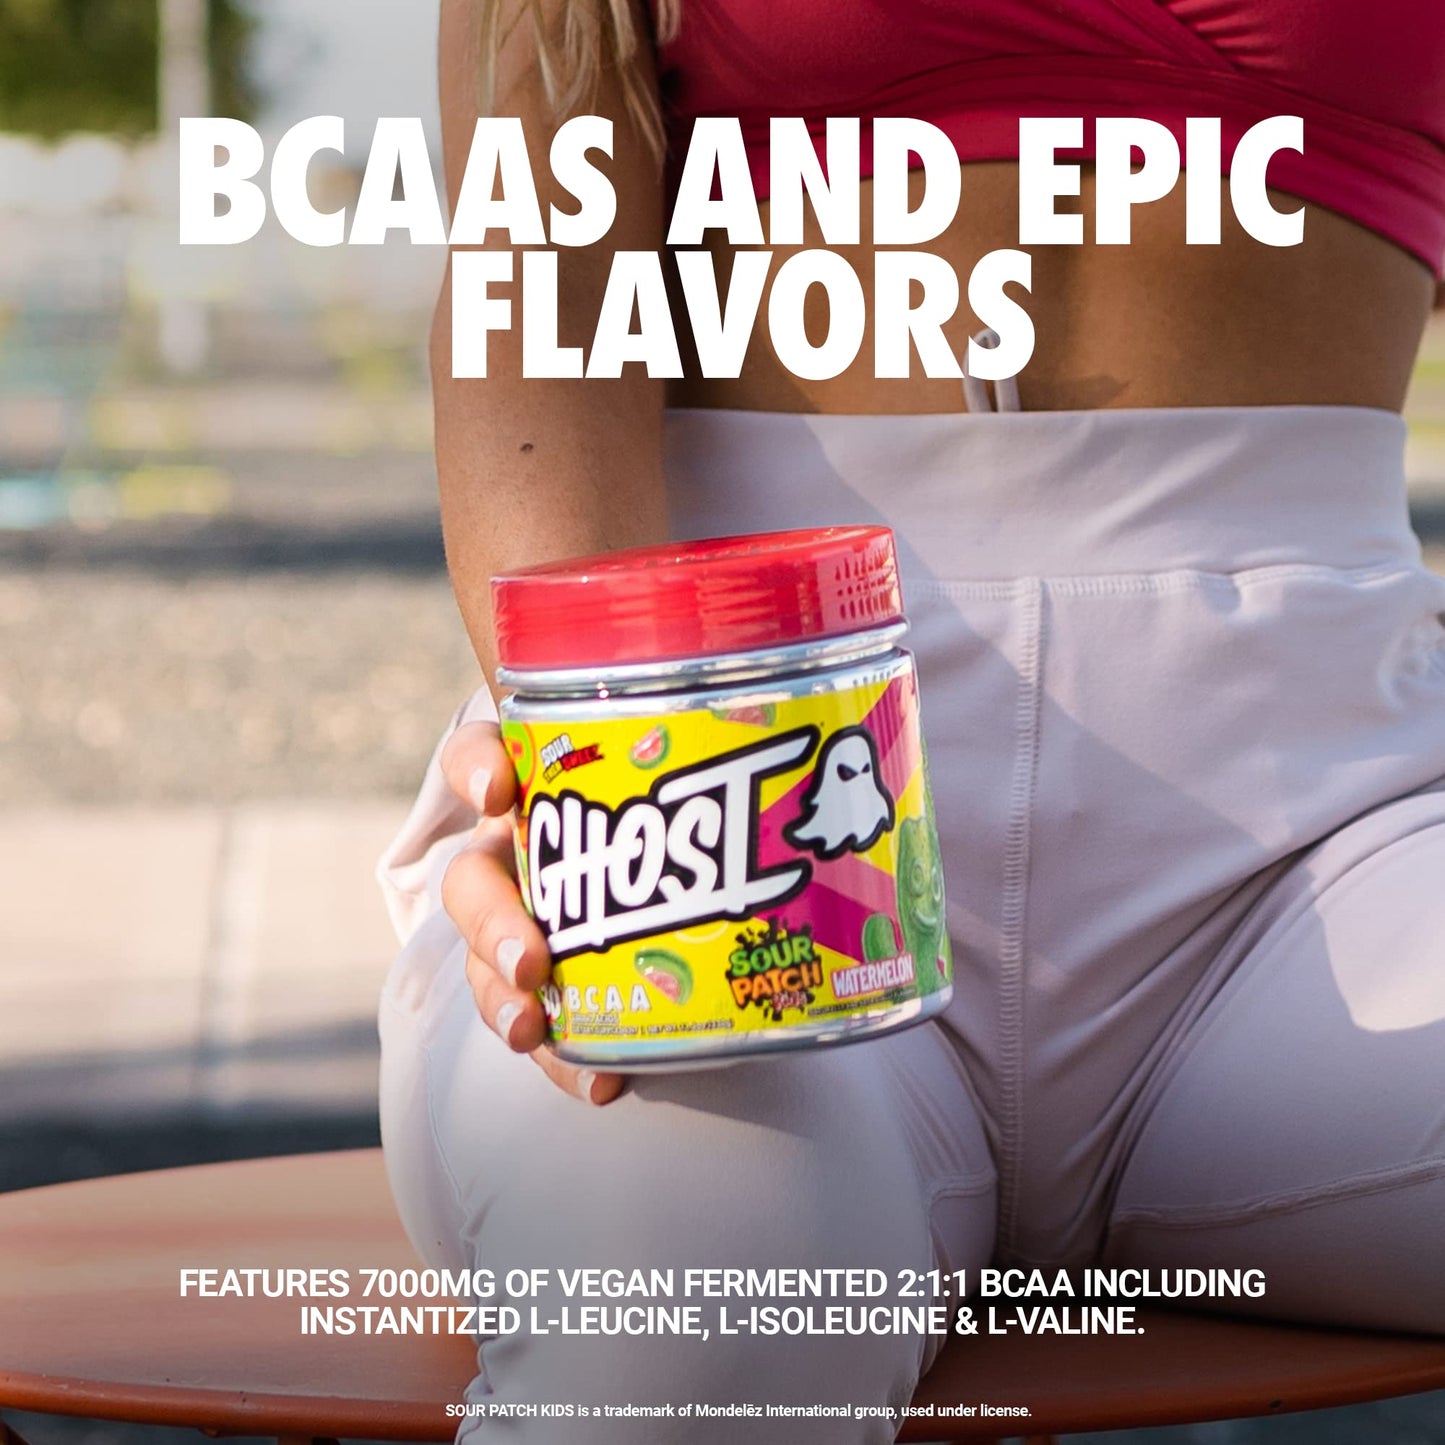 GHOST BCAA Powder Amino Acids Supplement, Lemon Crush - 30 Servings - Sugar-Free Intra, Post & Pre Workout Amino Powder & Recovery Drink, 7G BCAA Supports Muscle Growth